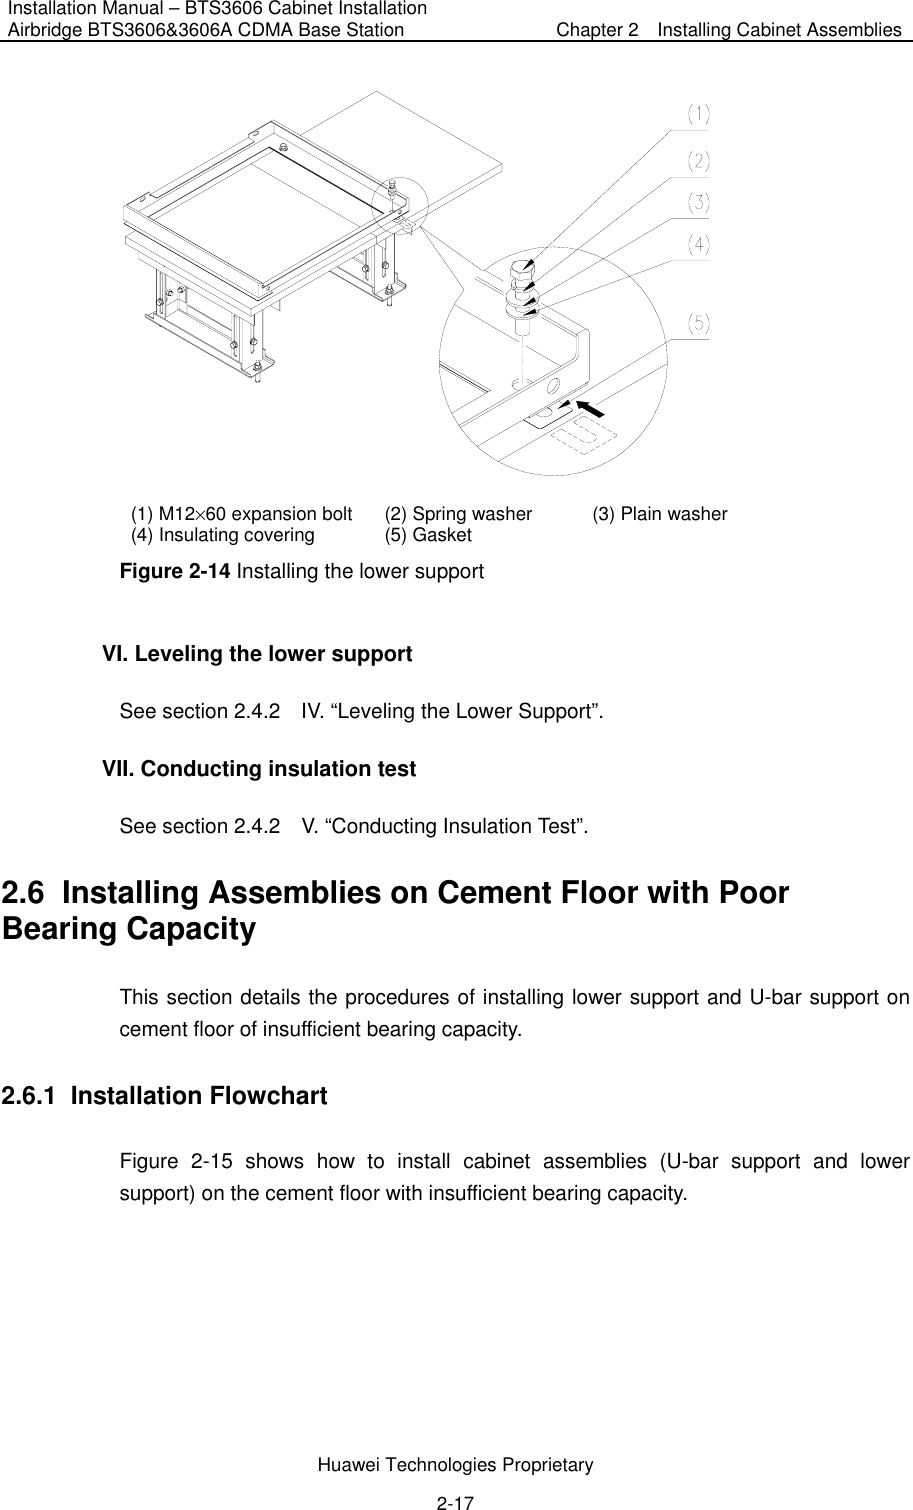 Installation Manual – BTS3606 Cabinet Installation Airbridge BTS3606&amp;3606A CDMA Base Station  Chapter 2    Installing Cabinet Assemblies  Huawei Technologies Proprietary 2-17  (1) M12%60 expansion bolt  (2) Spring washer  (3) Plain washer (4) Insulating covering (5) Gasket   Figure 2-14 Installing the lower support   VI. Leveling the lower support See section 2.4.2    IV. “Leveling the Lower Support”. VII. Conducting insulation test See section 2.4.2    V. “Conducting Insulation Test”. 2.6  Installing Assemblies on Cement Floor with Poor Bearing Capacity This section details the procedures of installing lower support and U-bar support on cement floor of insufficient bearing capacity. 2.6.1  Installation Flowchart Figure 2-15 shows how to install cabinet assemblies (U-bar support and lower support) on the cement floor with insufficient bearing capacity. 